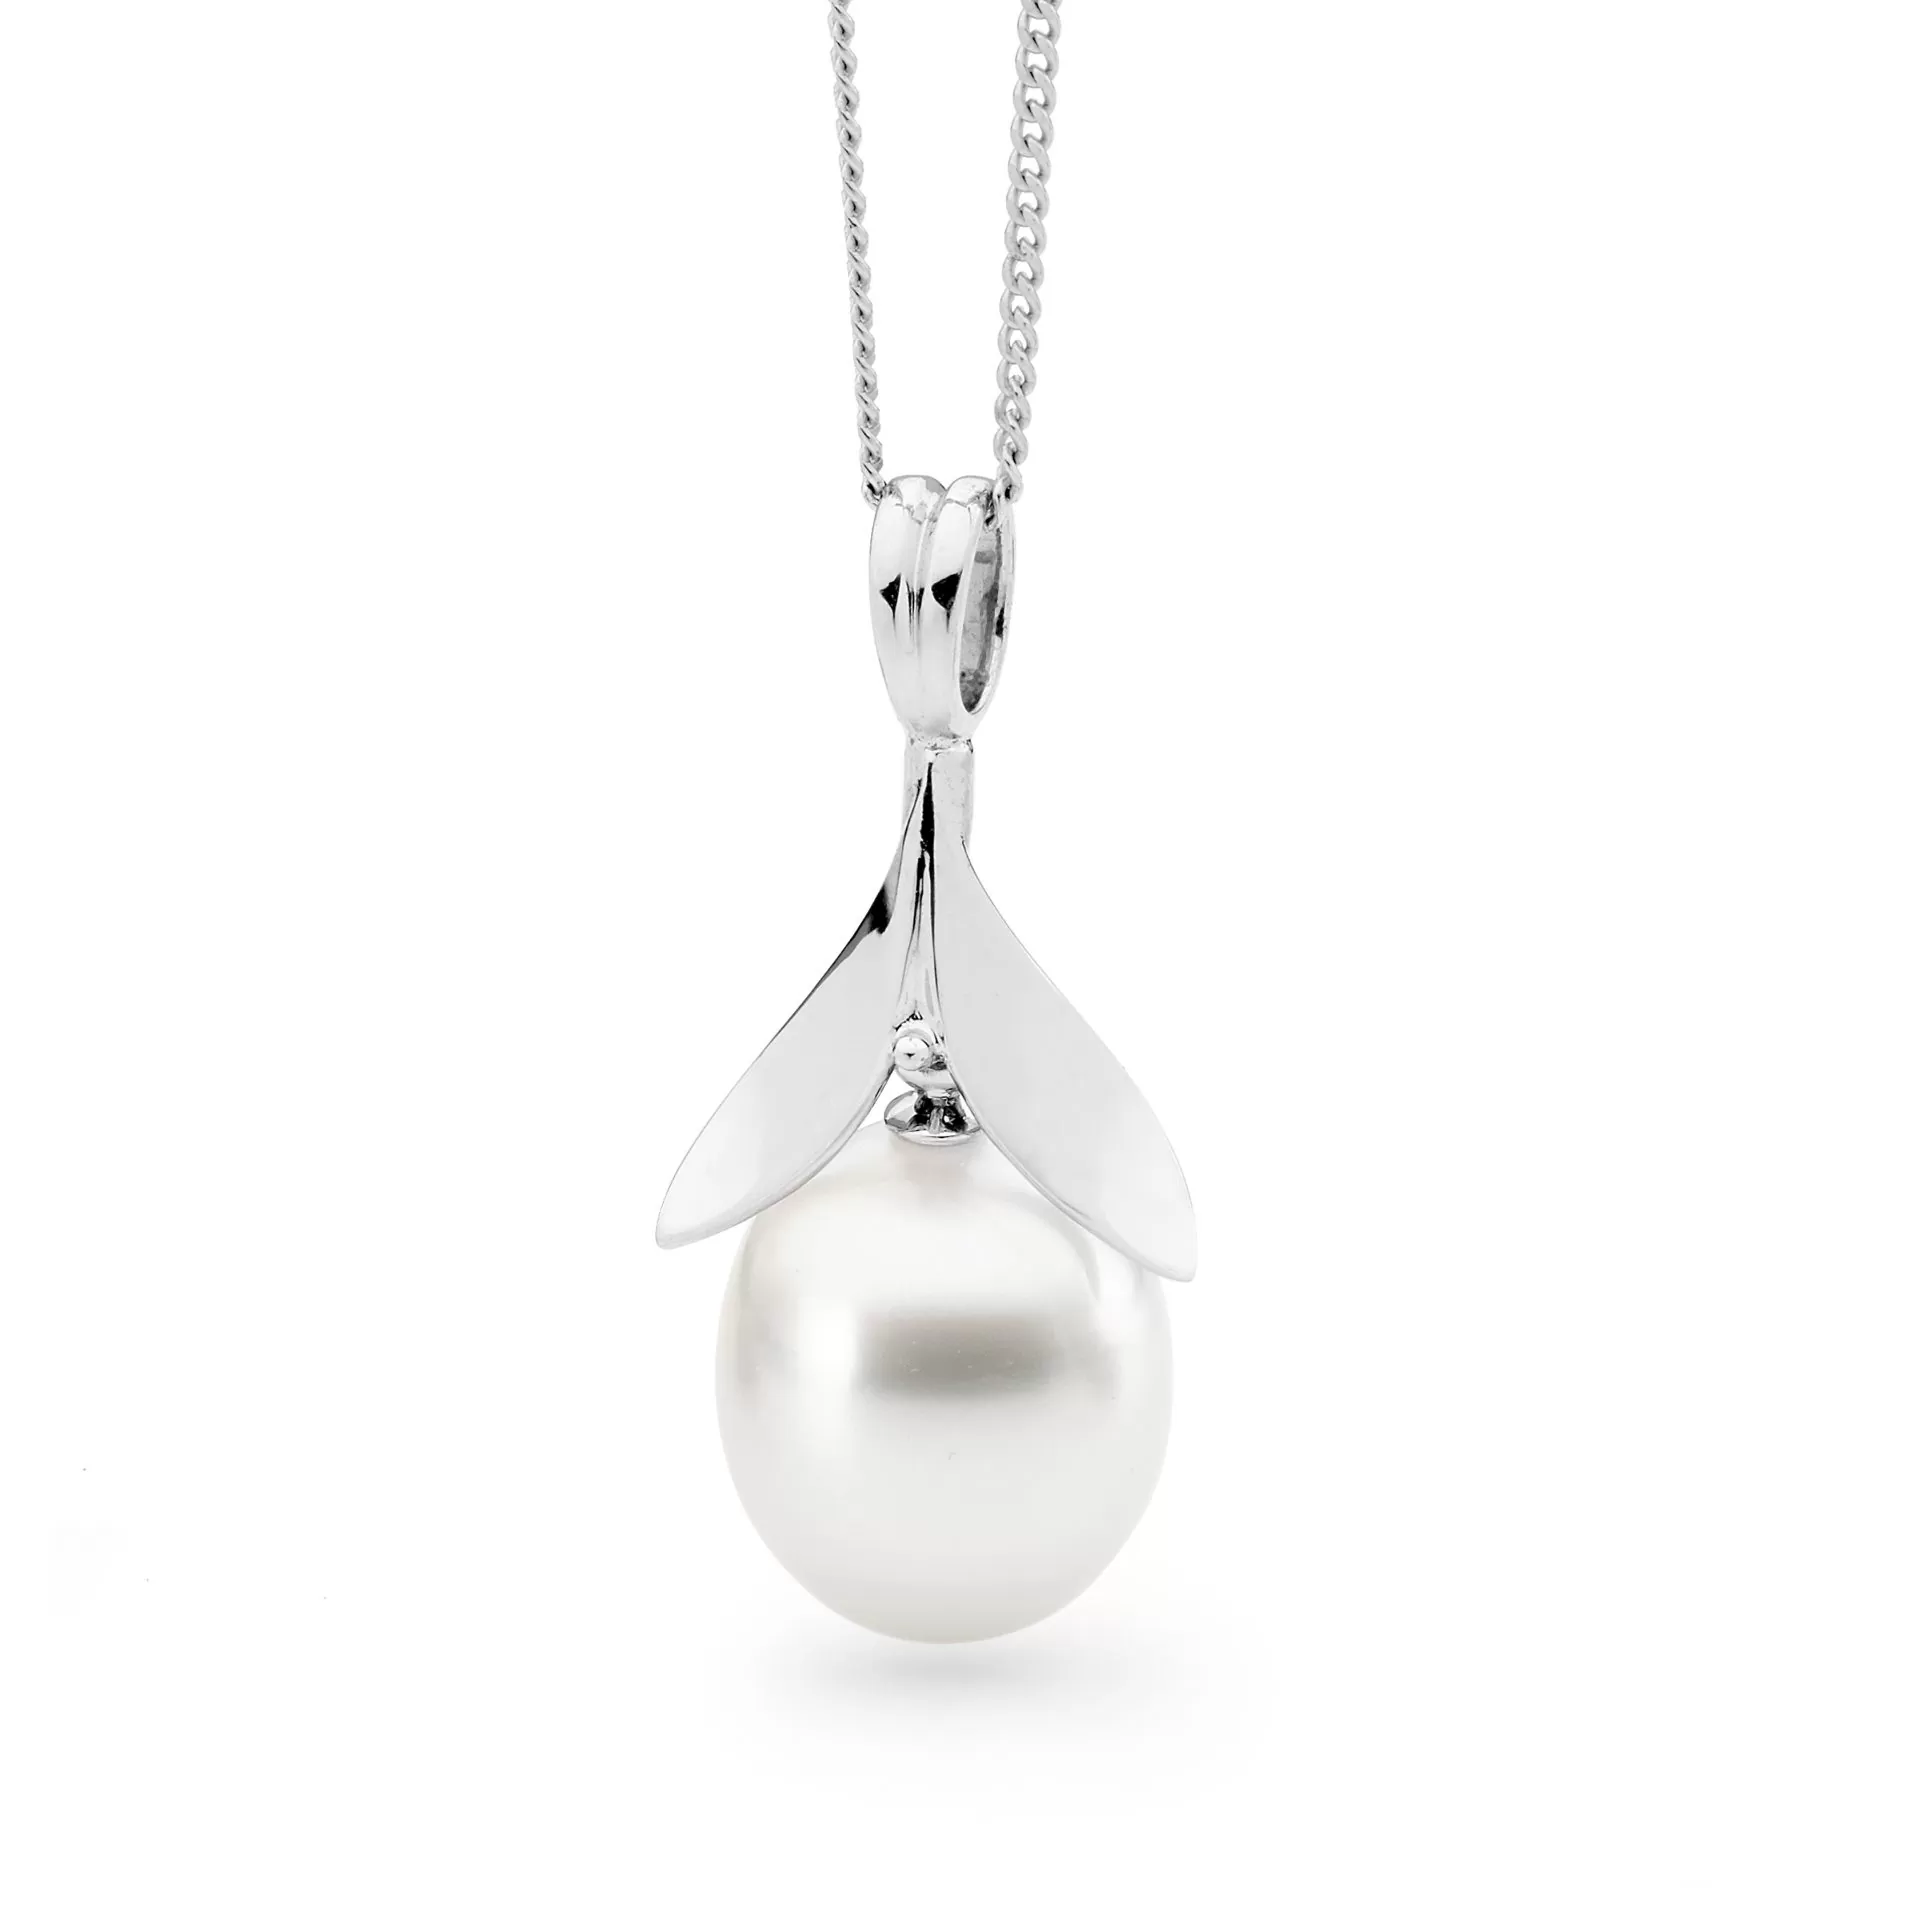 Allure Pearls necklace